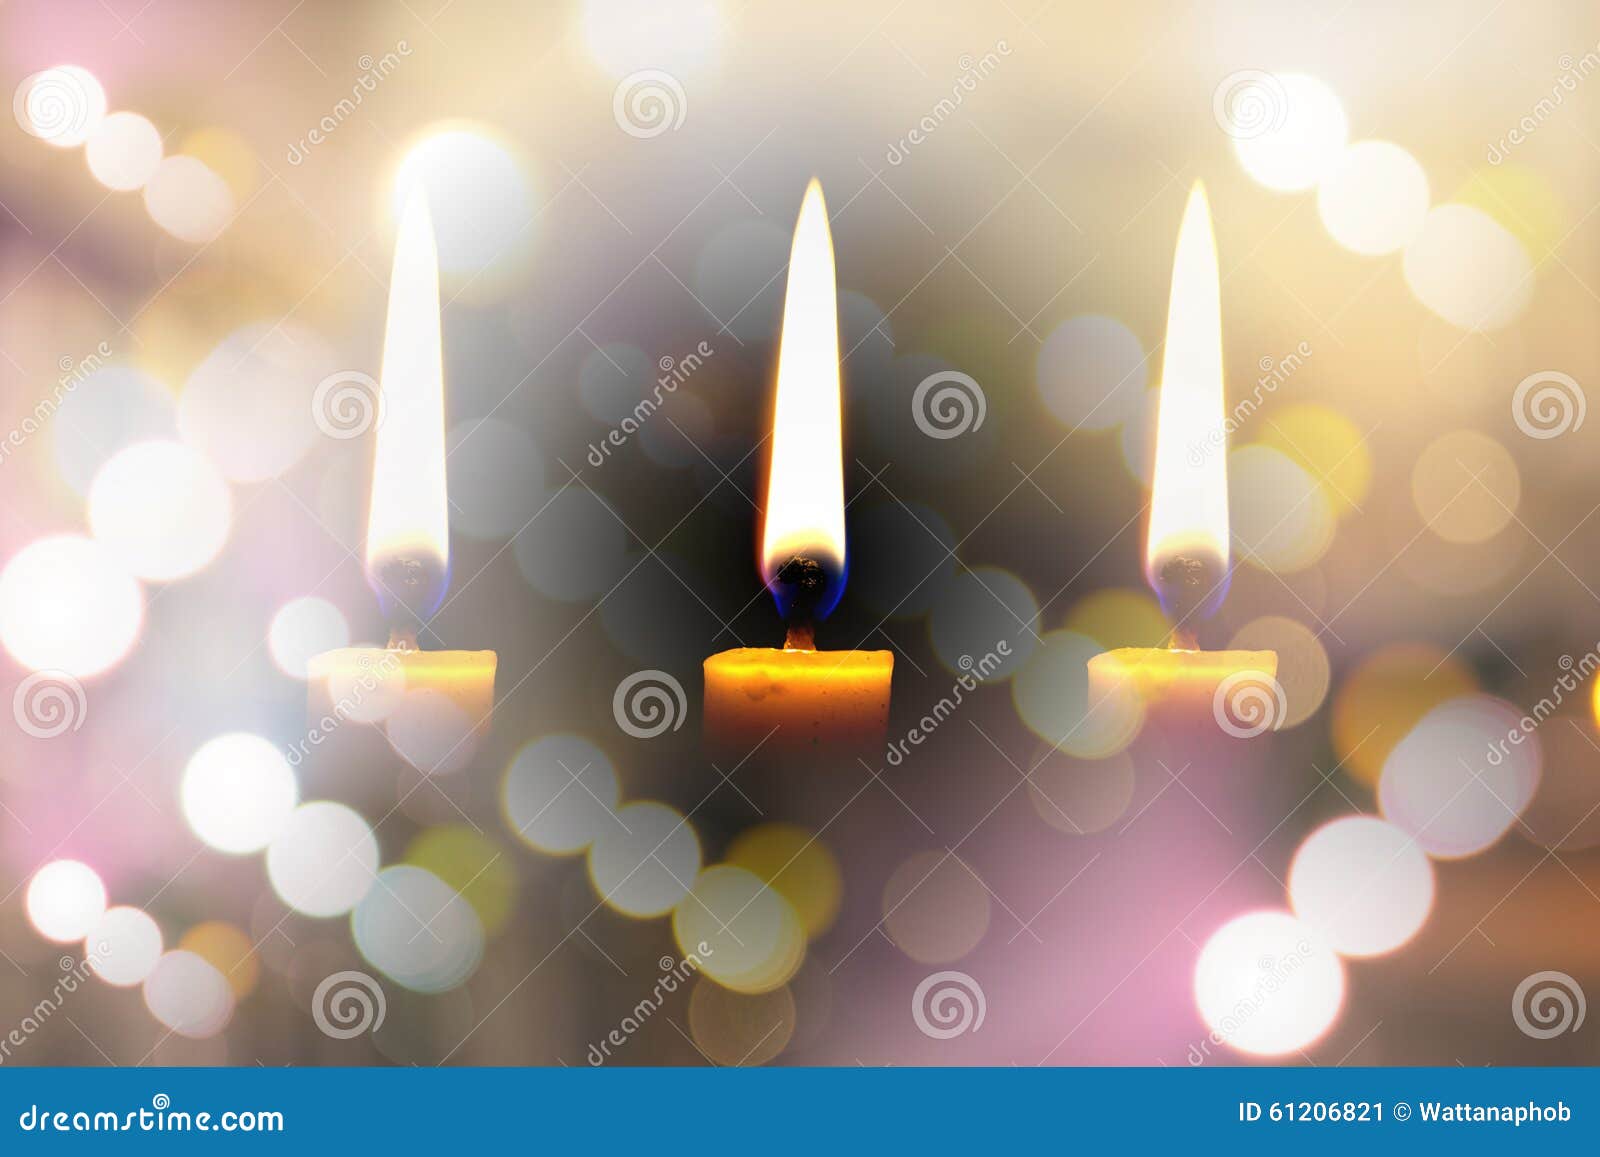 Light a Candle for Illumination at Night. Stock Image - Image of light ...